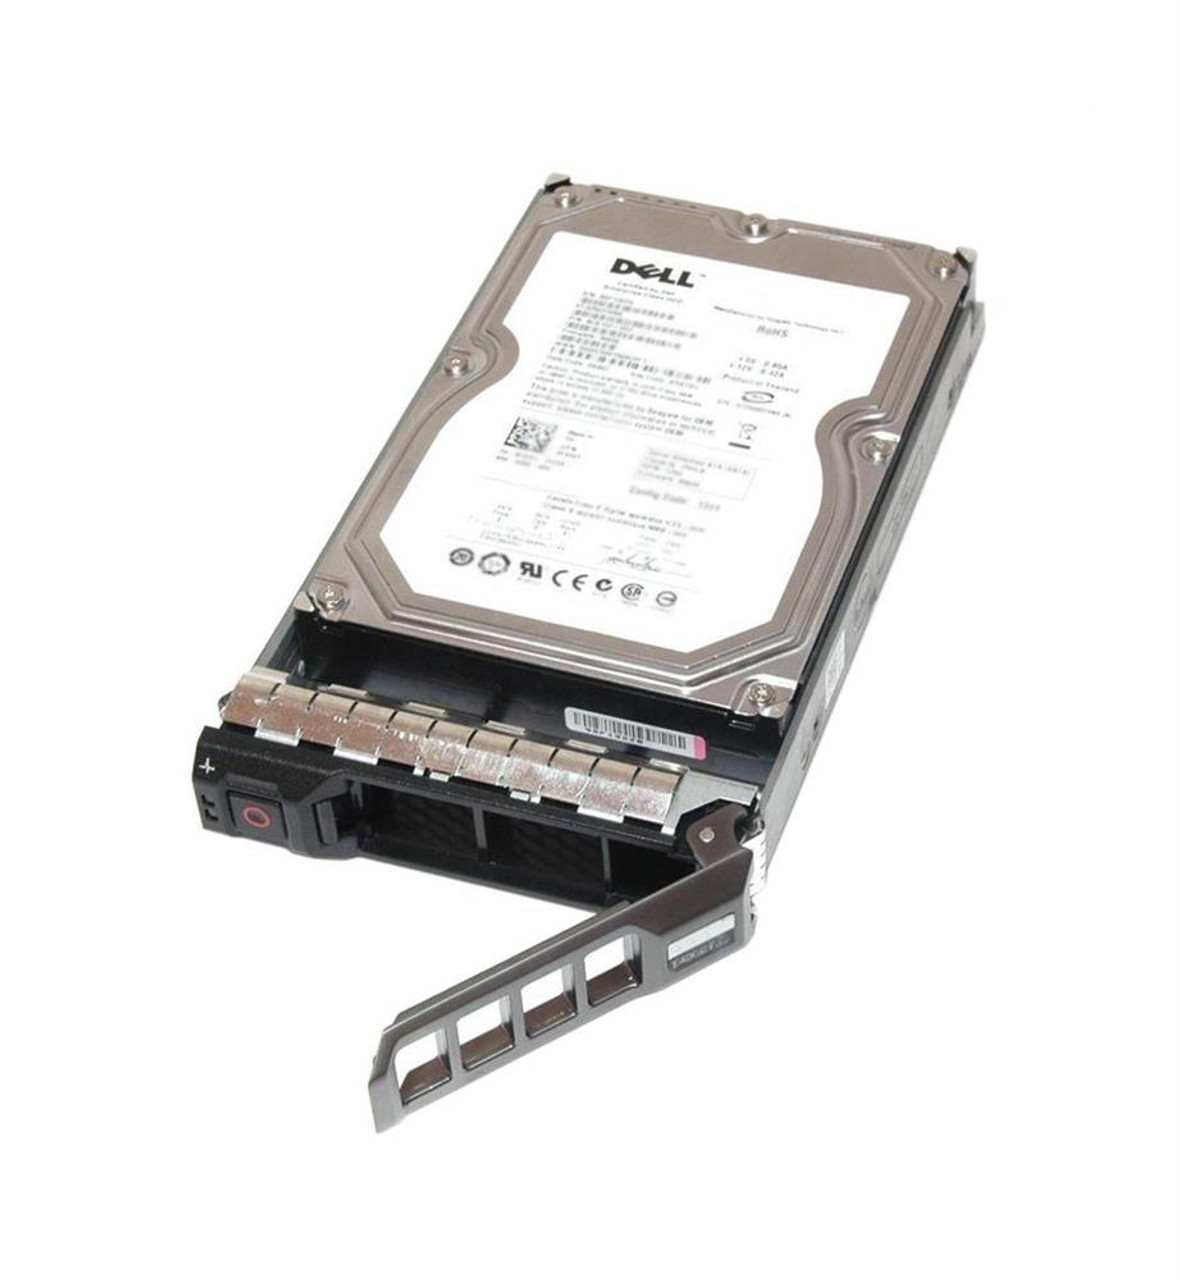 1SS127235RT Dell 1TB 7200RPM SAS 12Gbps Dual Port (512n) 3.5-inch Internal Hard Drive with Tray